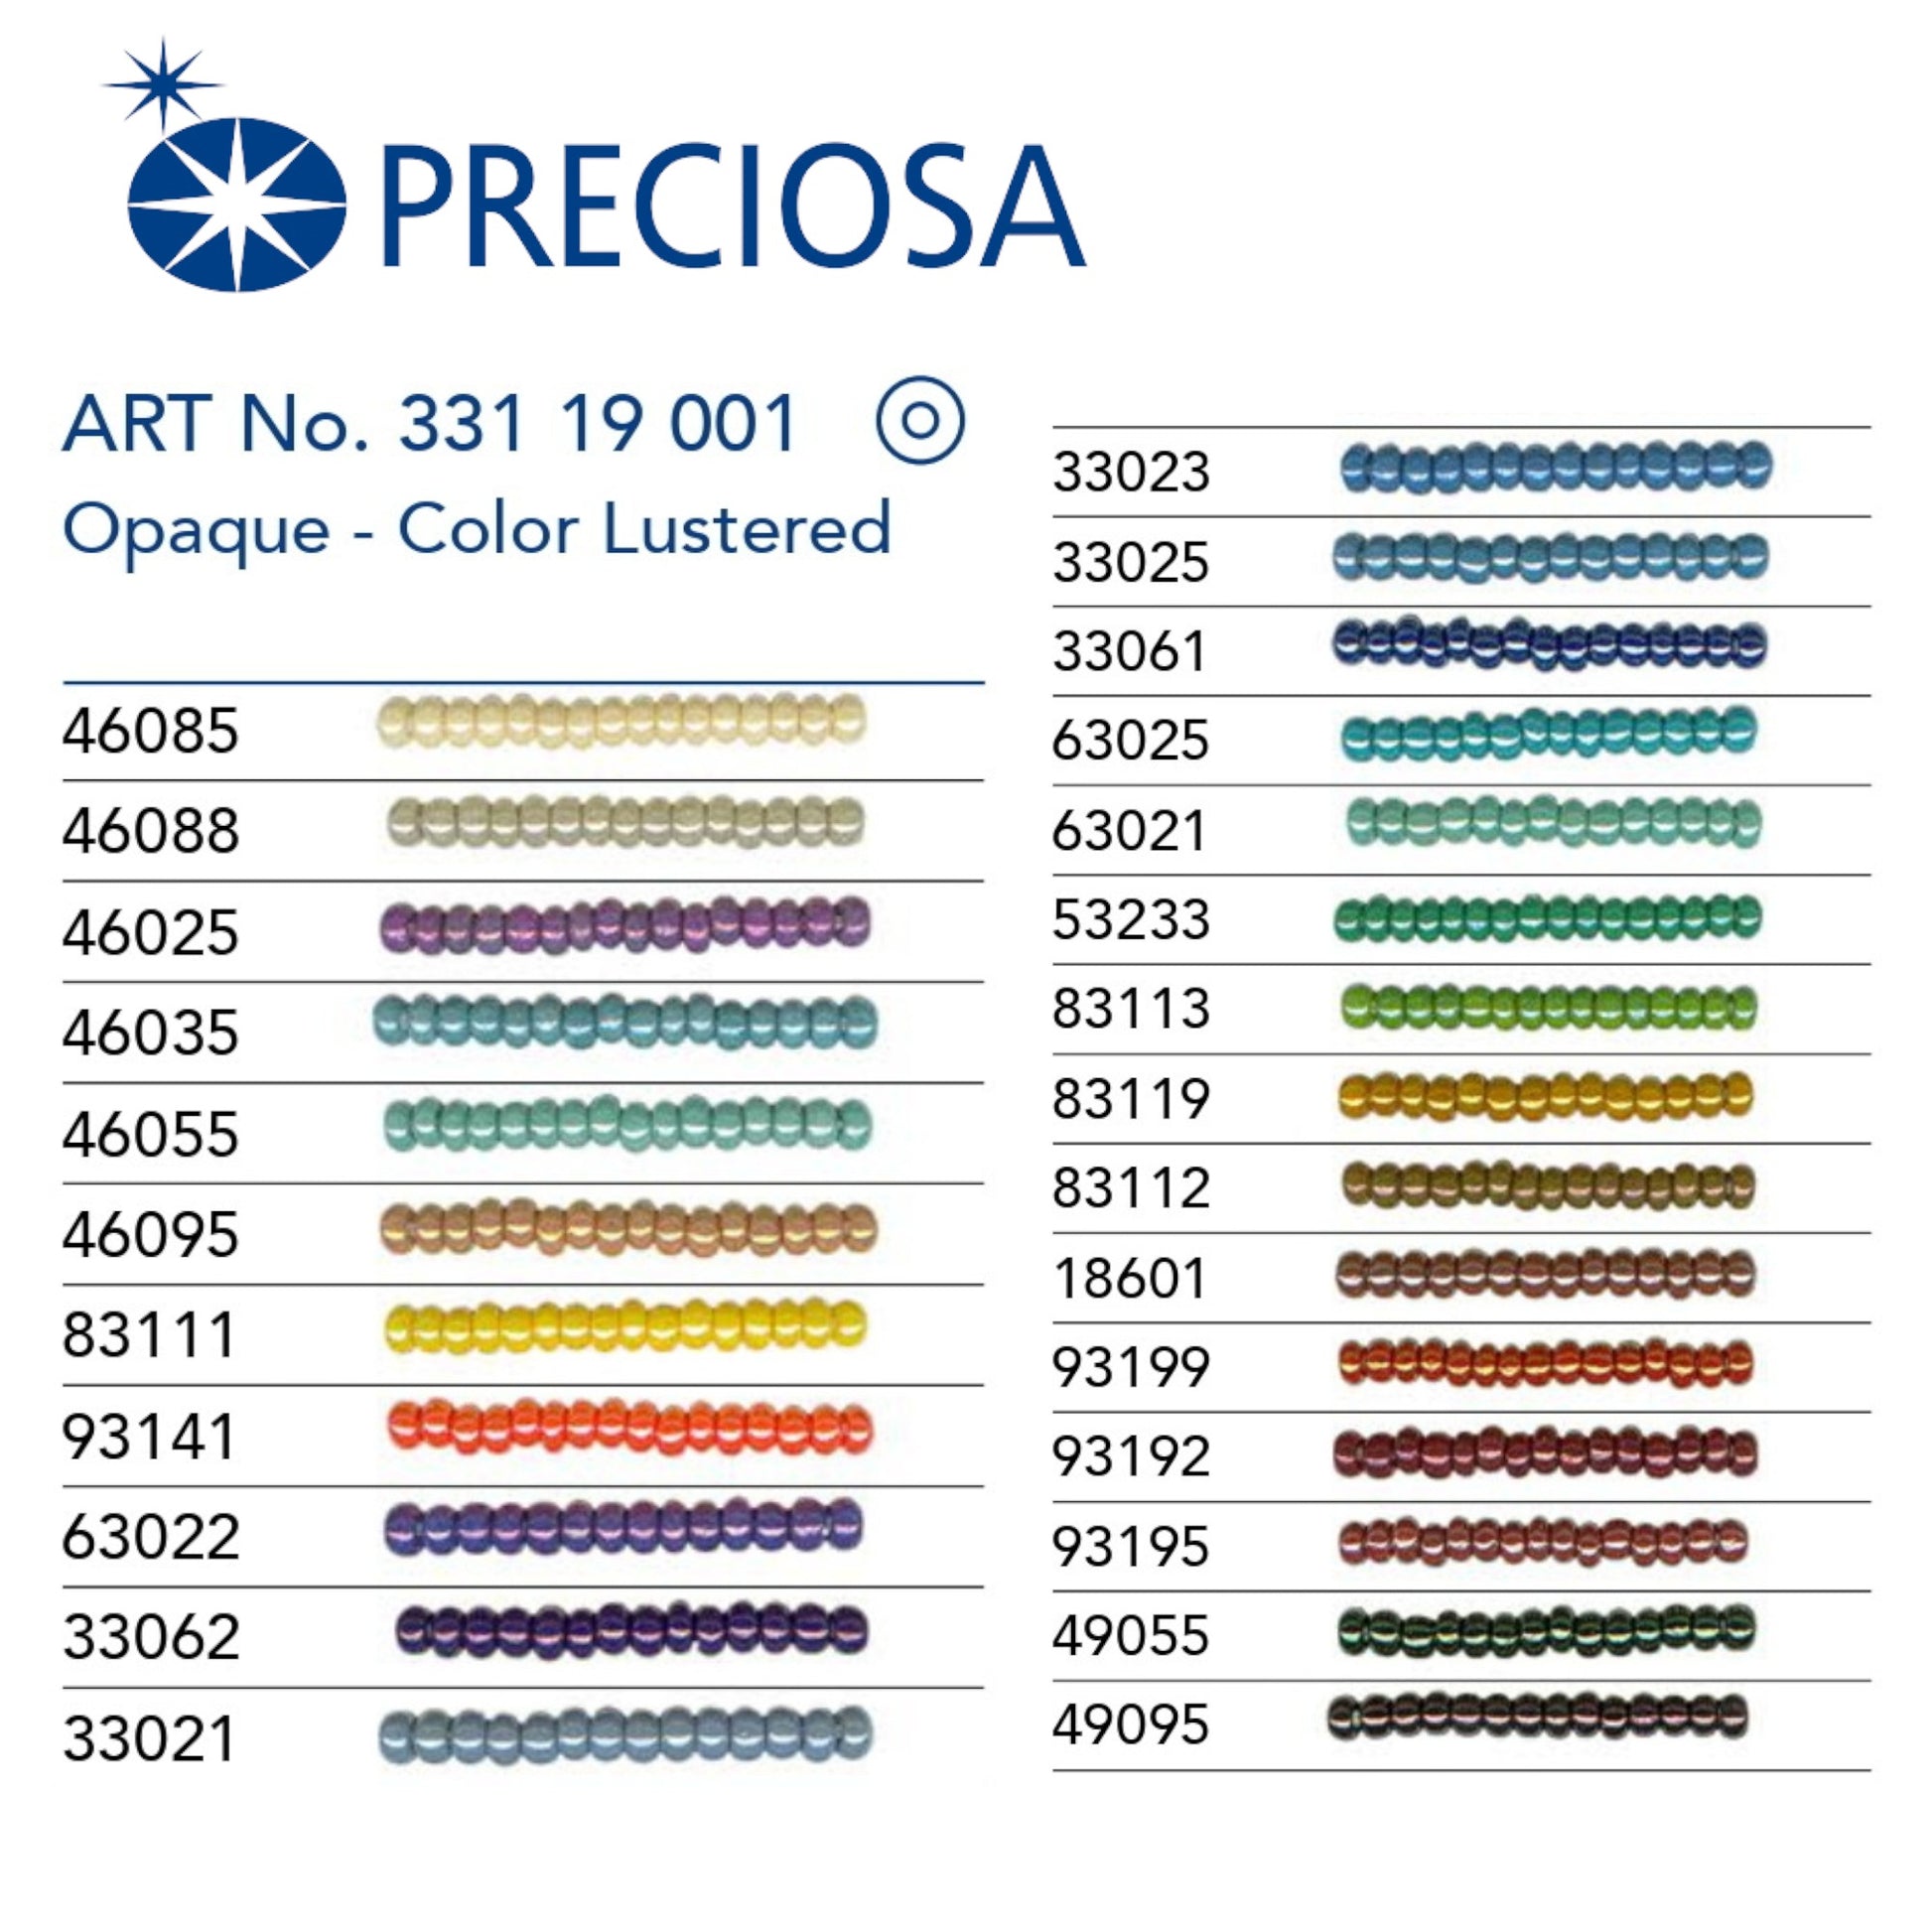 63025 Czech Seed Beads Preciosa Rocailes Opaque - Color Lustered - VadymShop